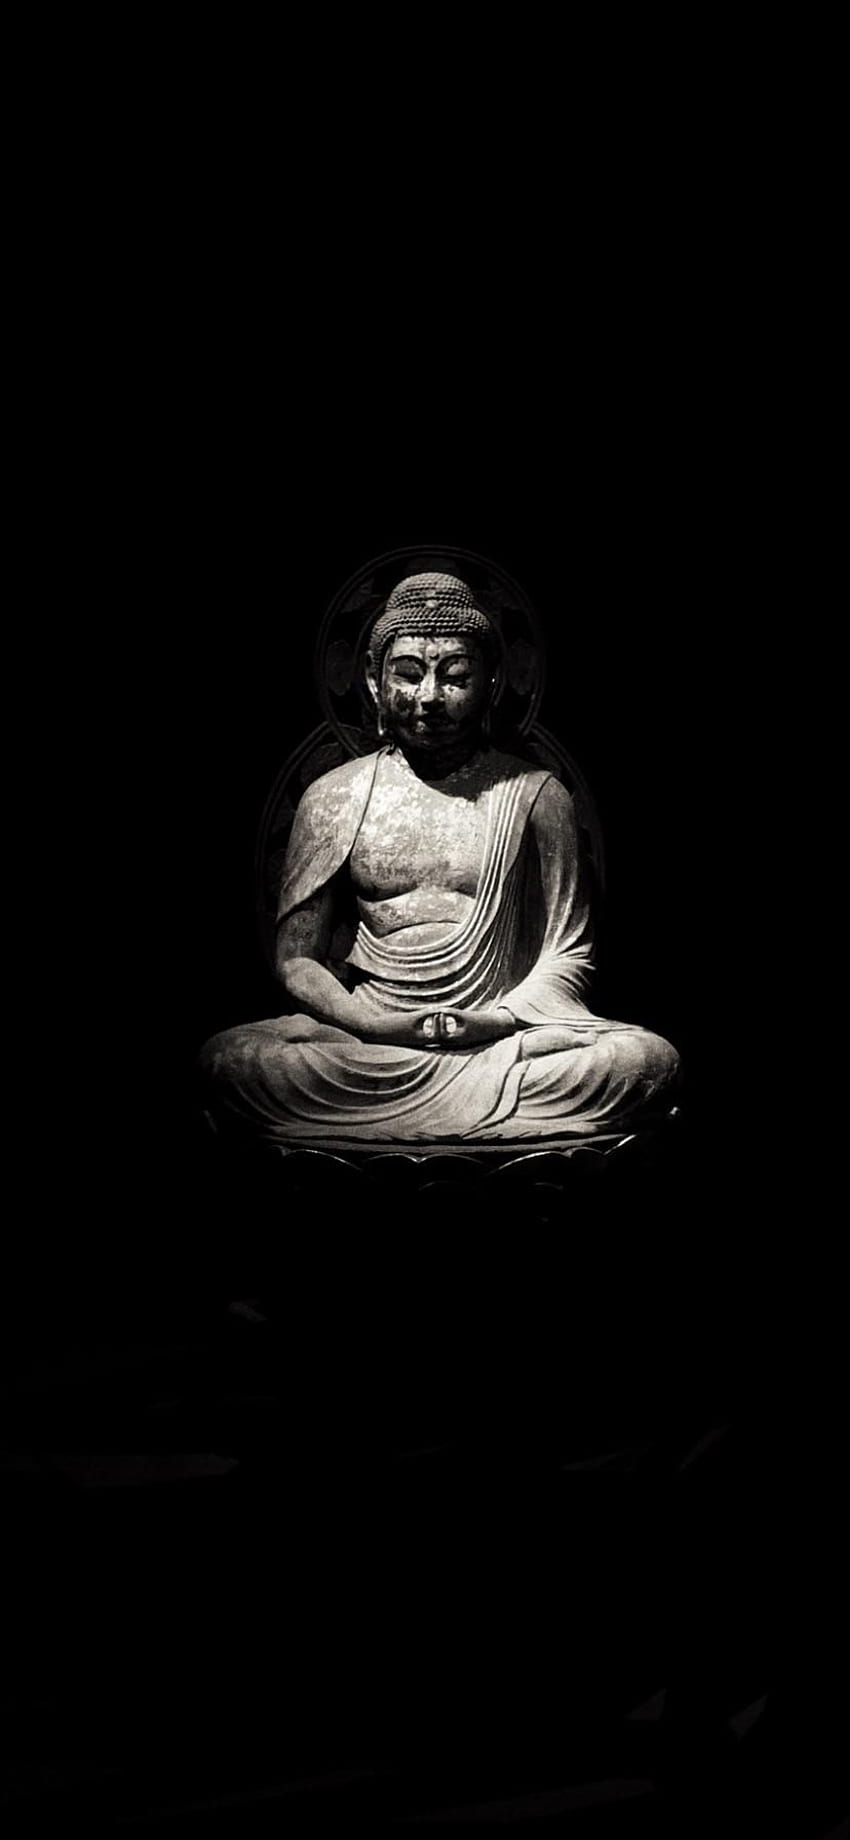 A I made from a I took at the Met Museum. Buddha iphone, Met museum, Buddha art, Dark Buddha HD phone wallpaper